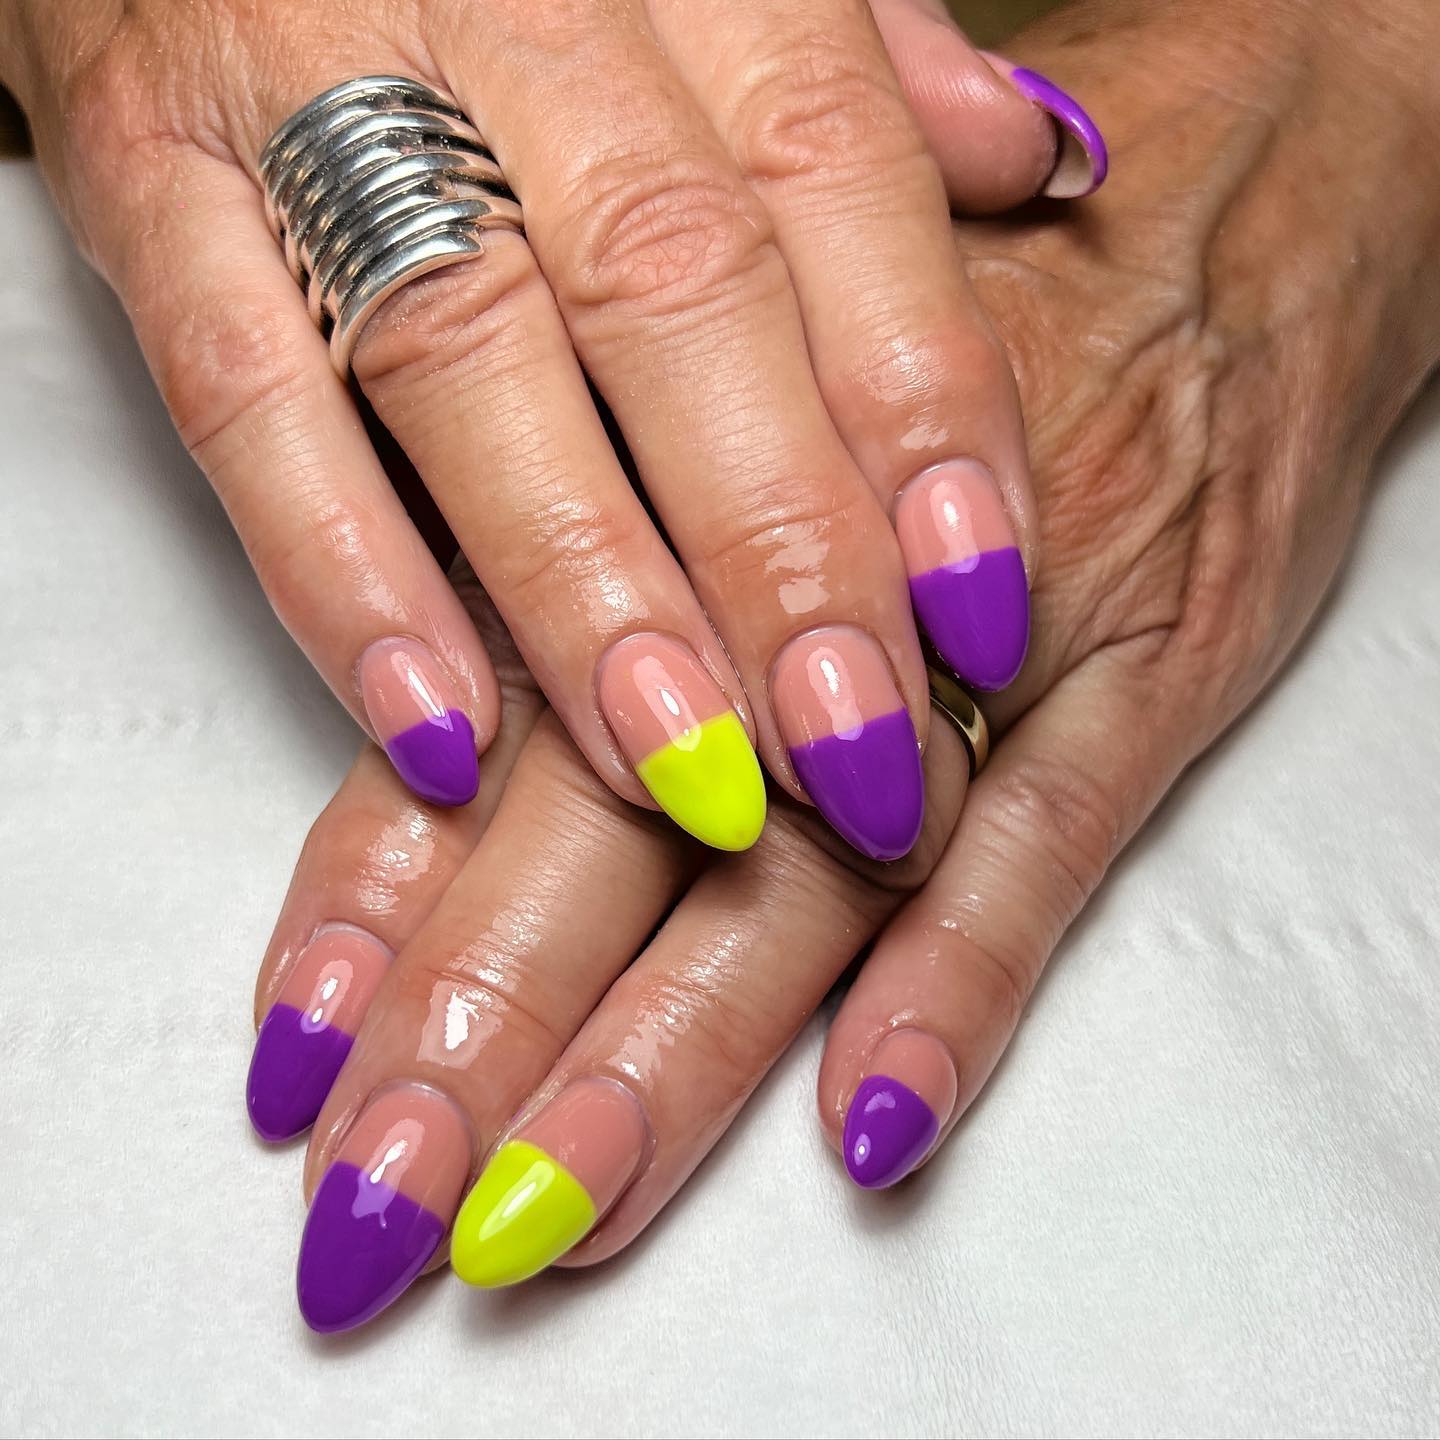  To stand out from the crowd, why don't you try something new? In this nail design, nude, purple and yellow colors are used to give a half nail design look.